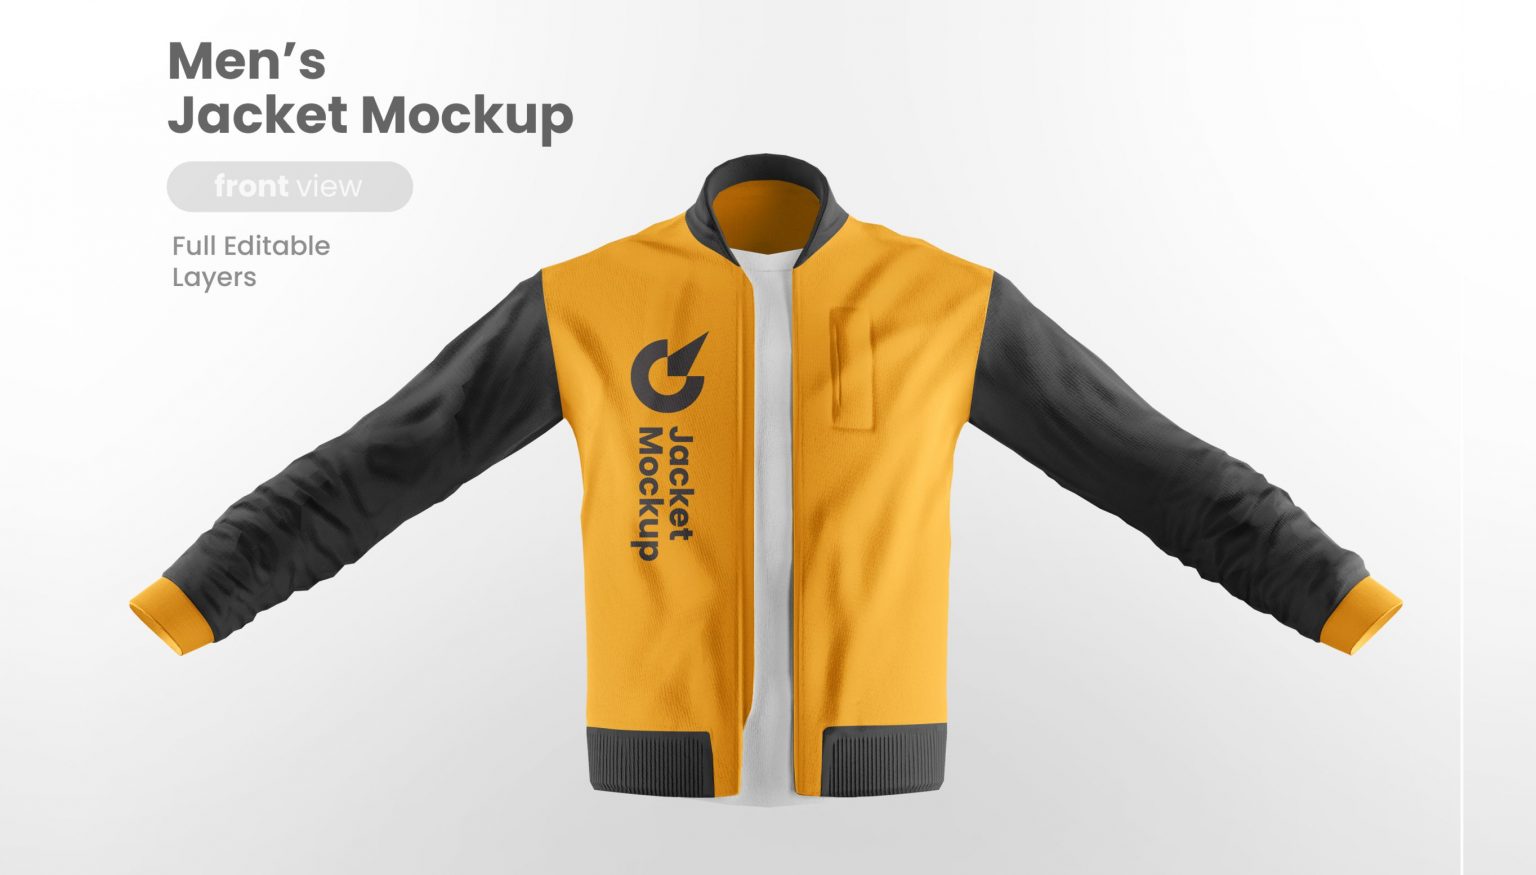 Front View Jacket Mockup PSD Free Download